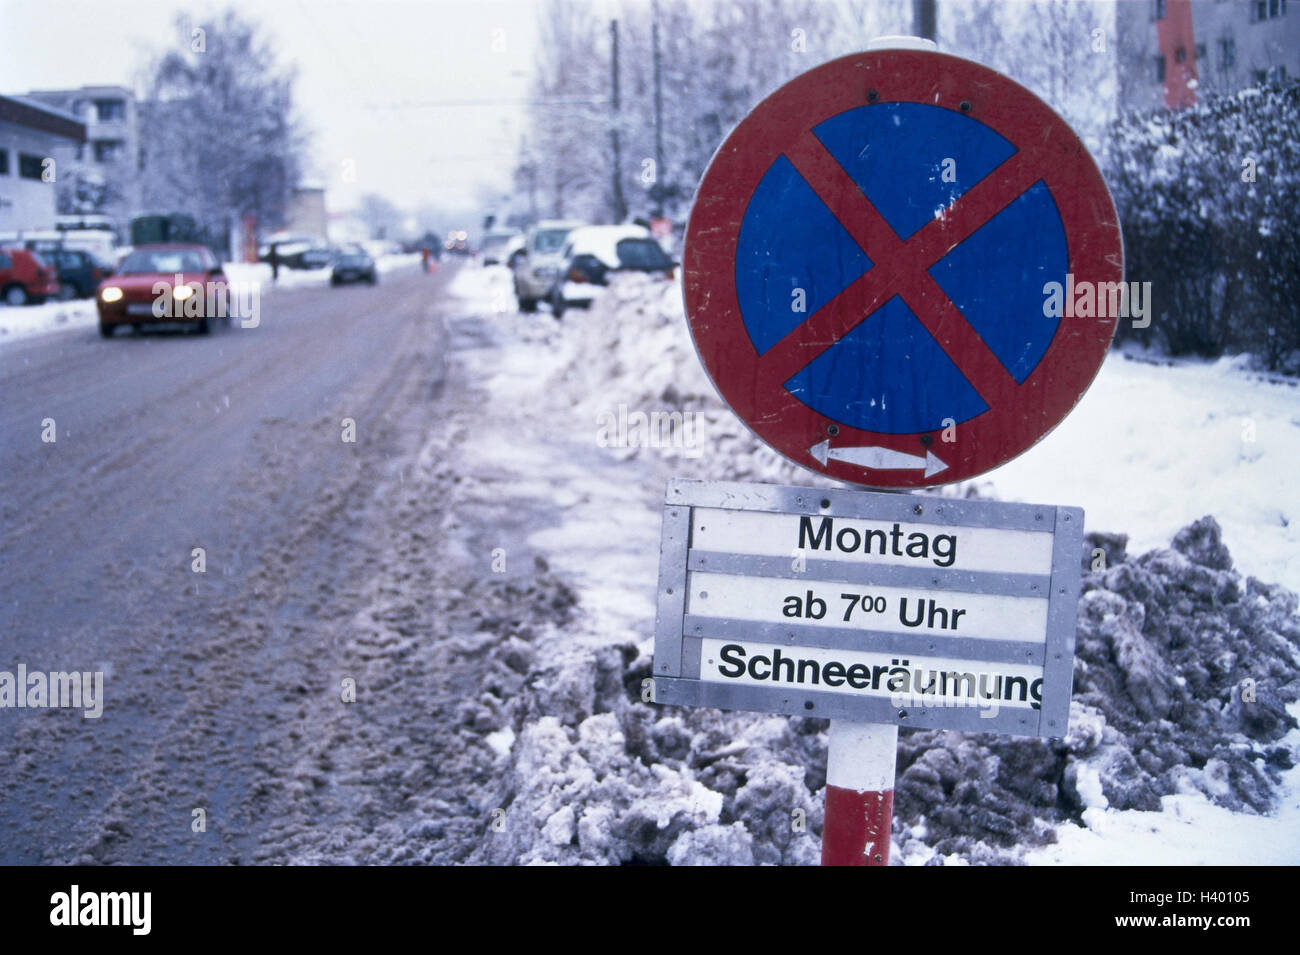 Roadside, road sign, stop ban, "Monday from 7.00 o'clock snow clearing",  snow, winter, Schneeräumdienst, snow, traffic, street, winter service, tip,  information, ban, park, no parking sign, traffic sign, no parking, sign  Stock